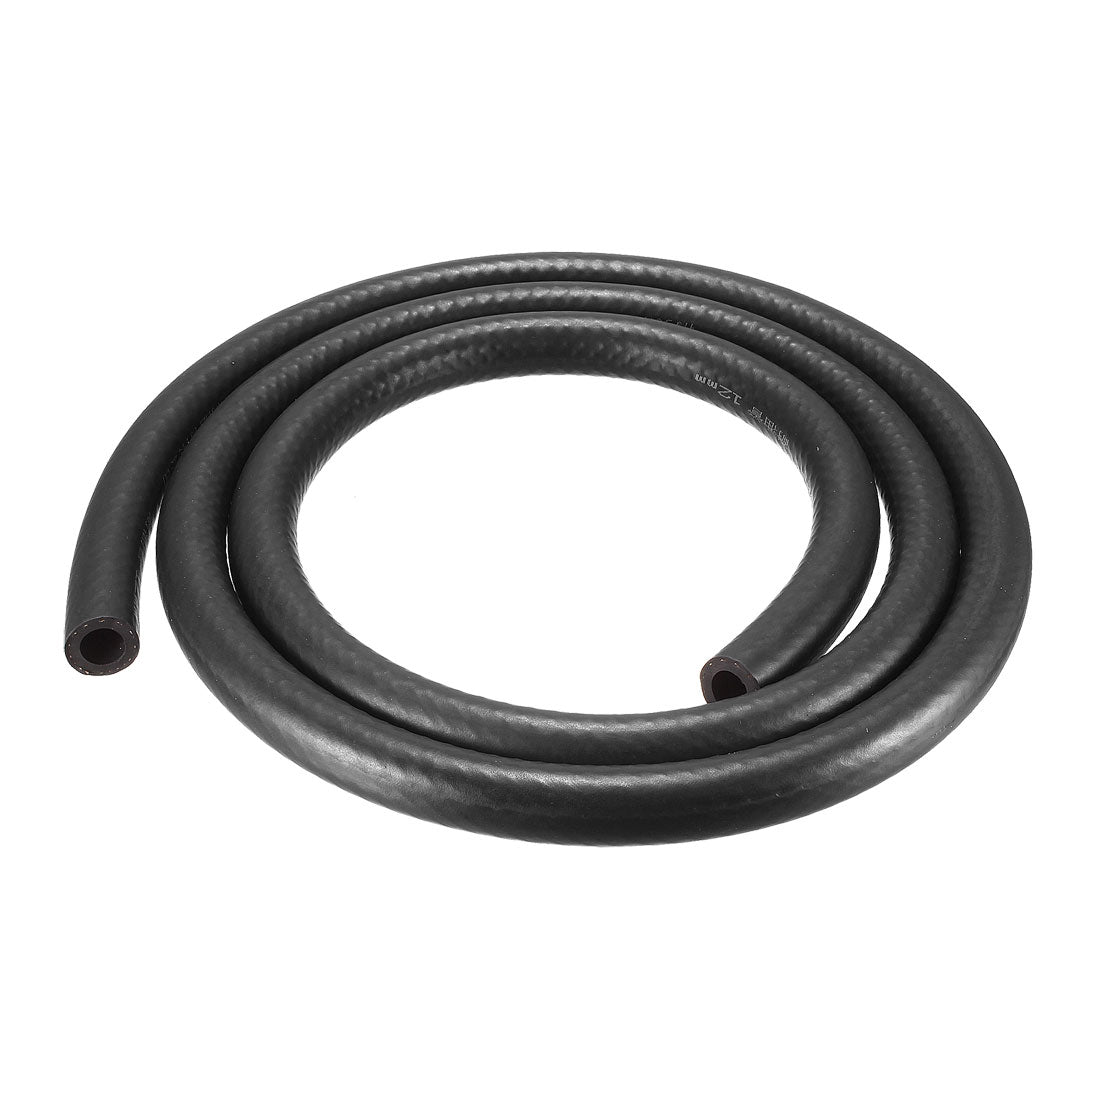 uxcell Uxcell Fuel Line Fuel Hose Rubber  12mm I.D.  1.8M/5.9FT  Diesel Petrol Hose Engine Pipe Tubing